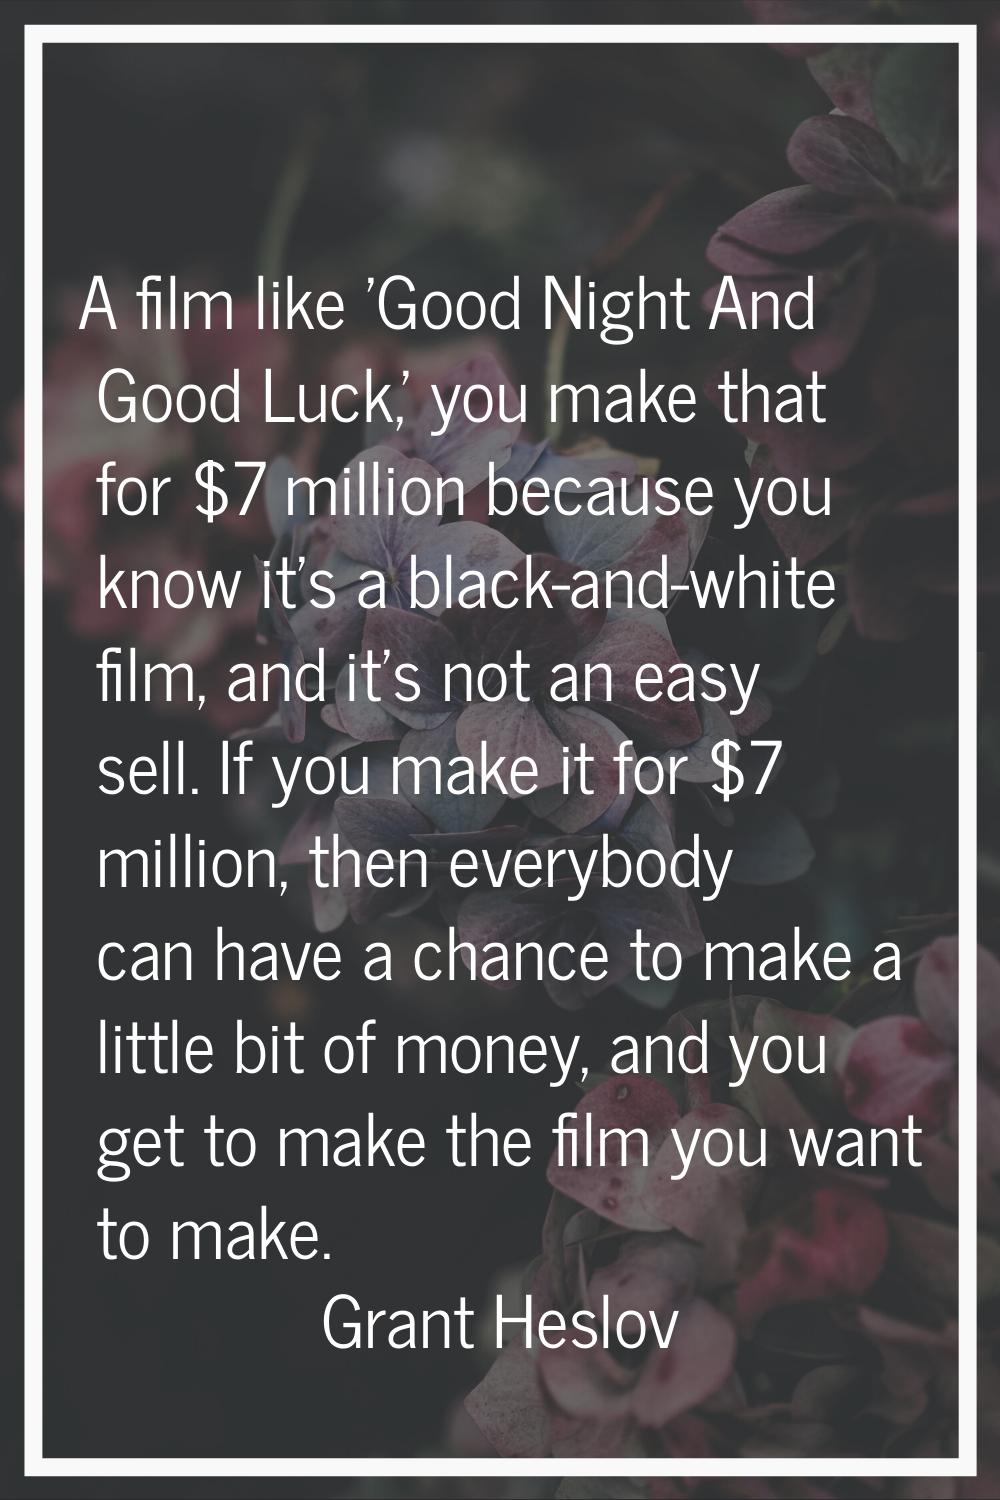 A film like 'Good Night And Good Luck,' you make that for $7 million because you know it's a black-